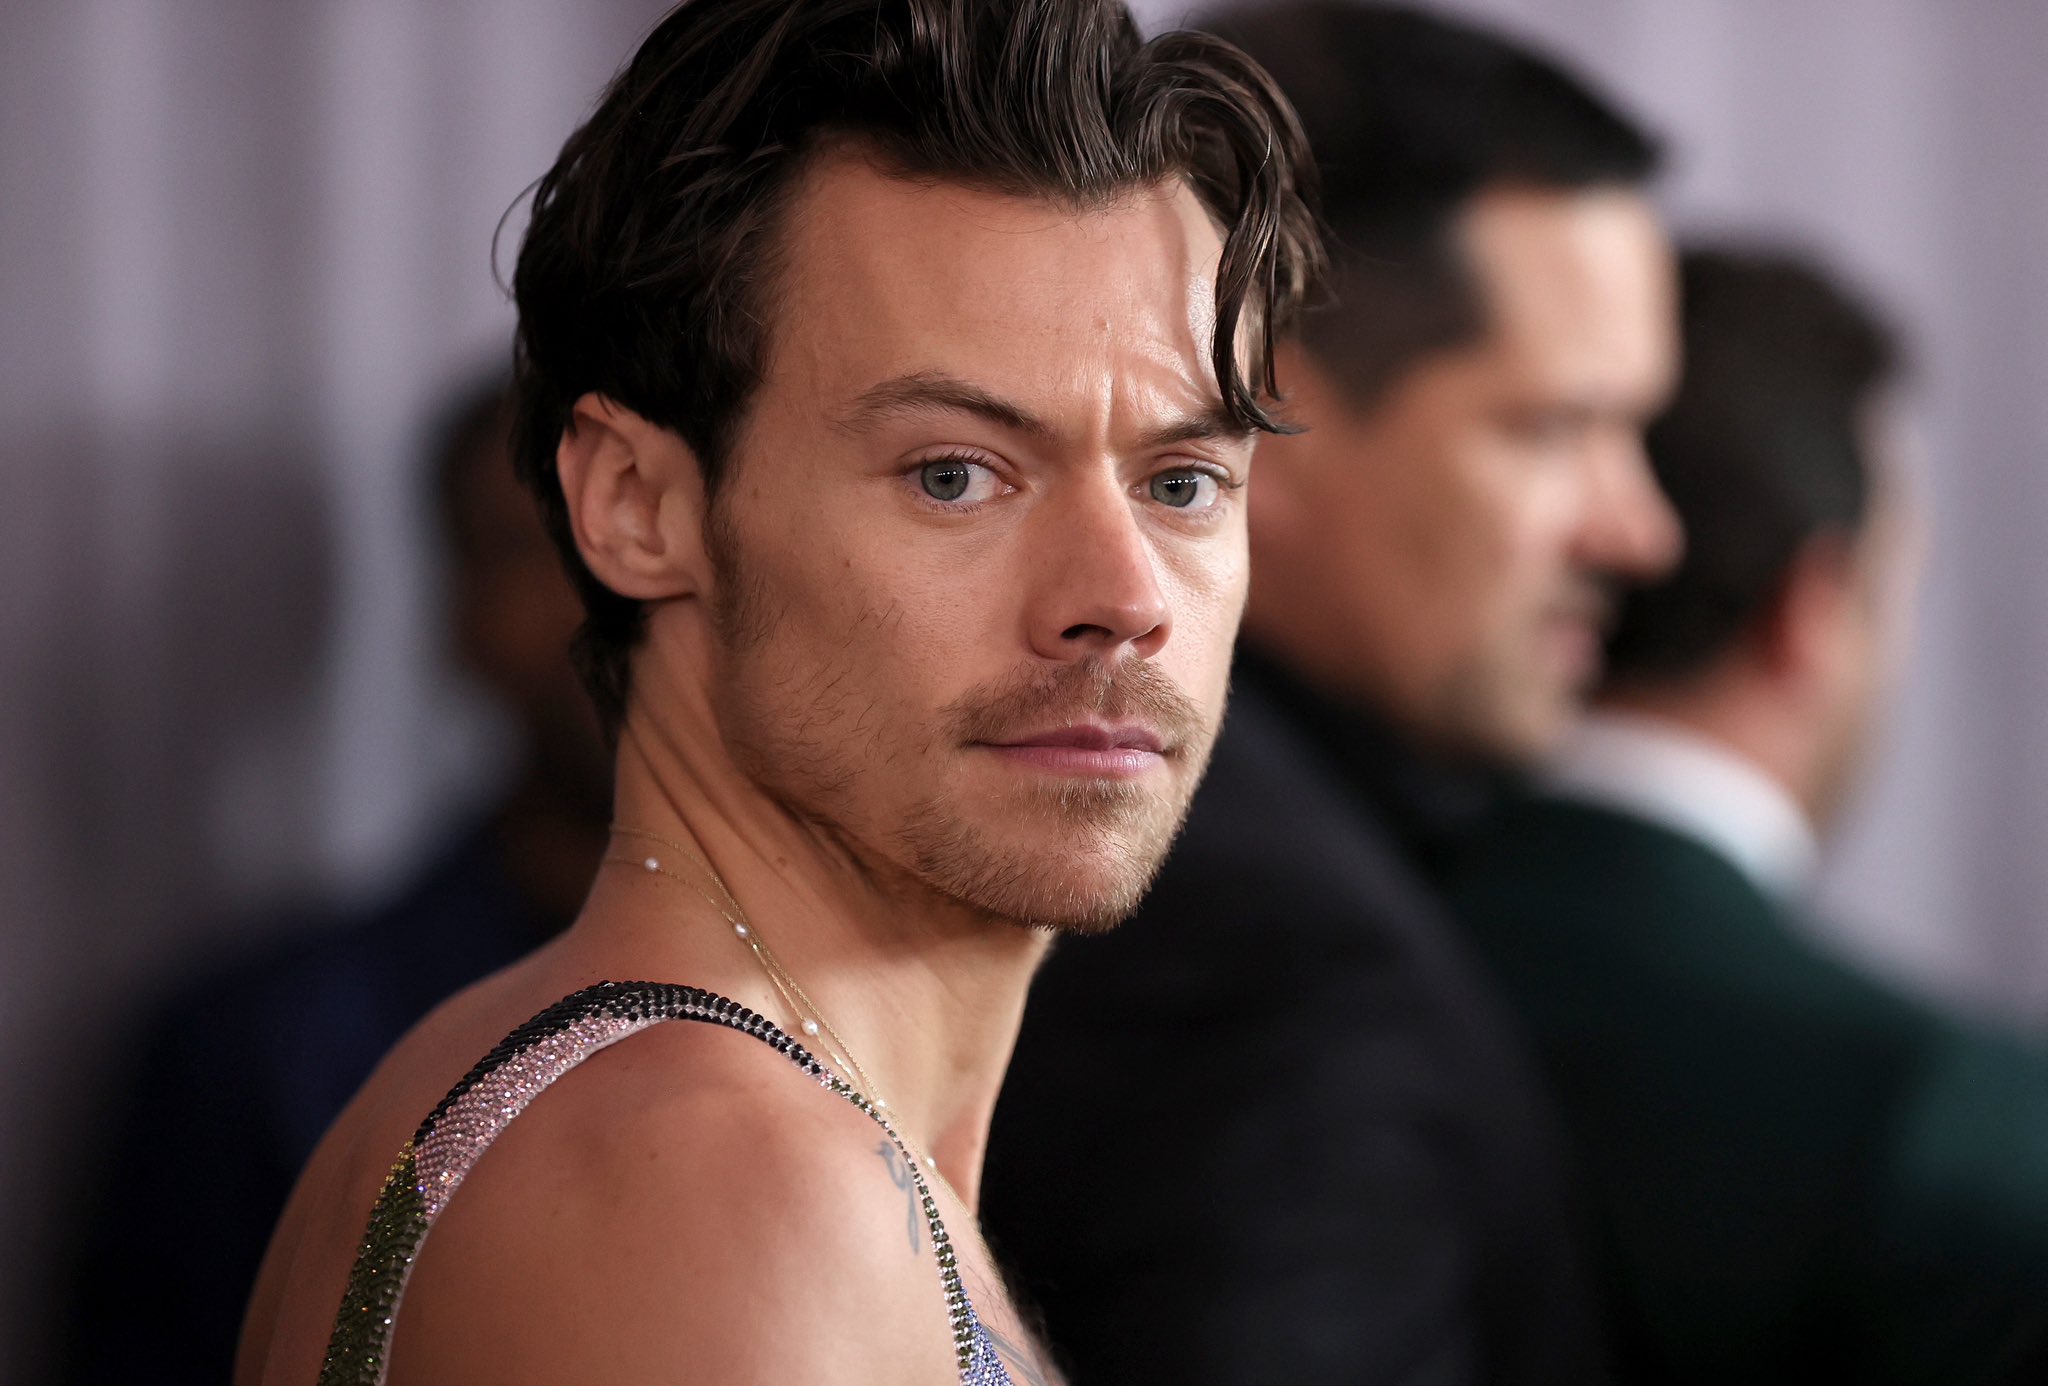 Harry Styles Walked The Red Carpet in An Outfit That Looks Like My Grandma’s Quilt and I Love It